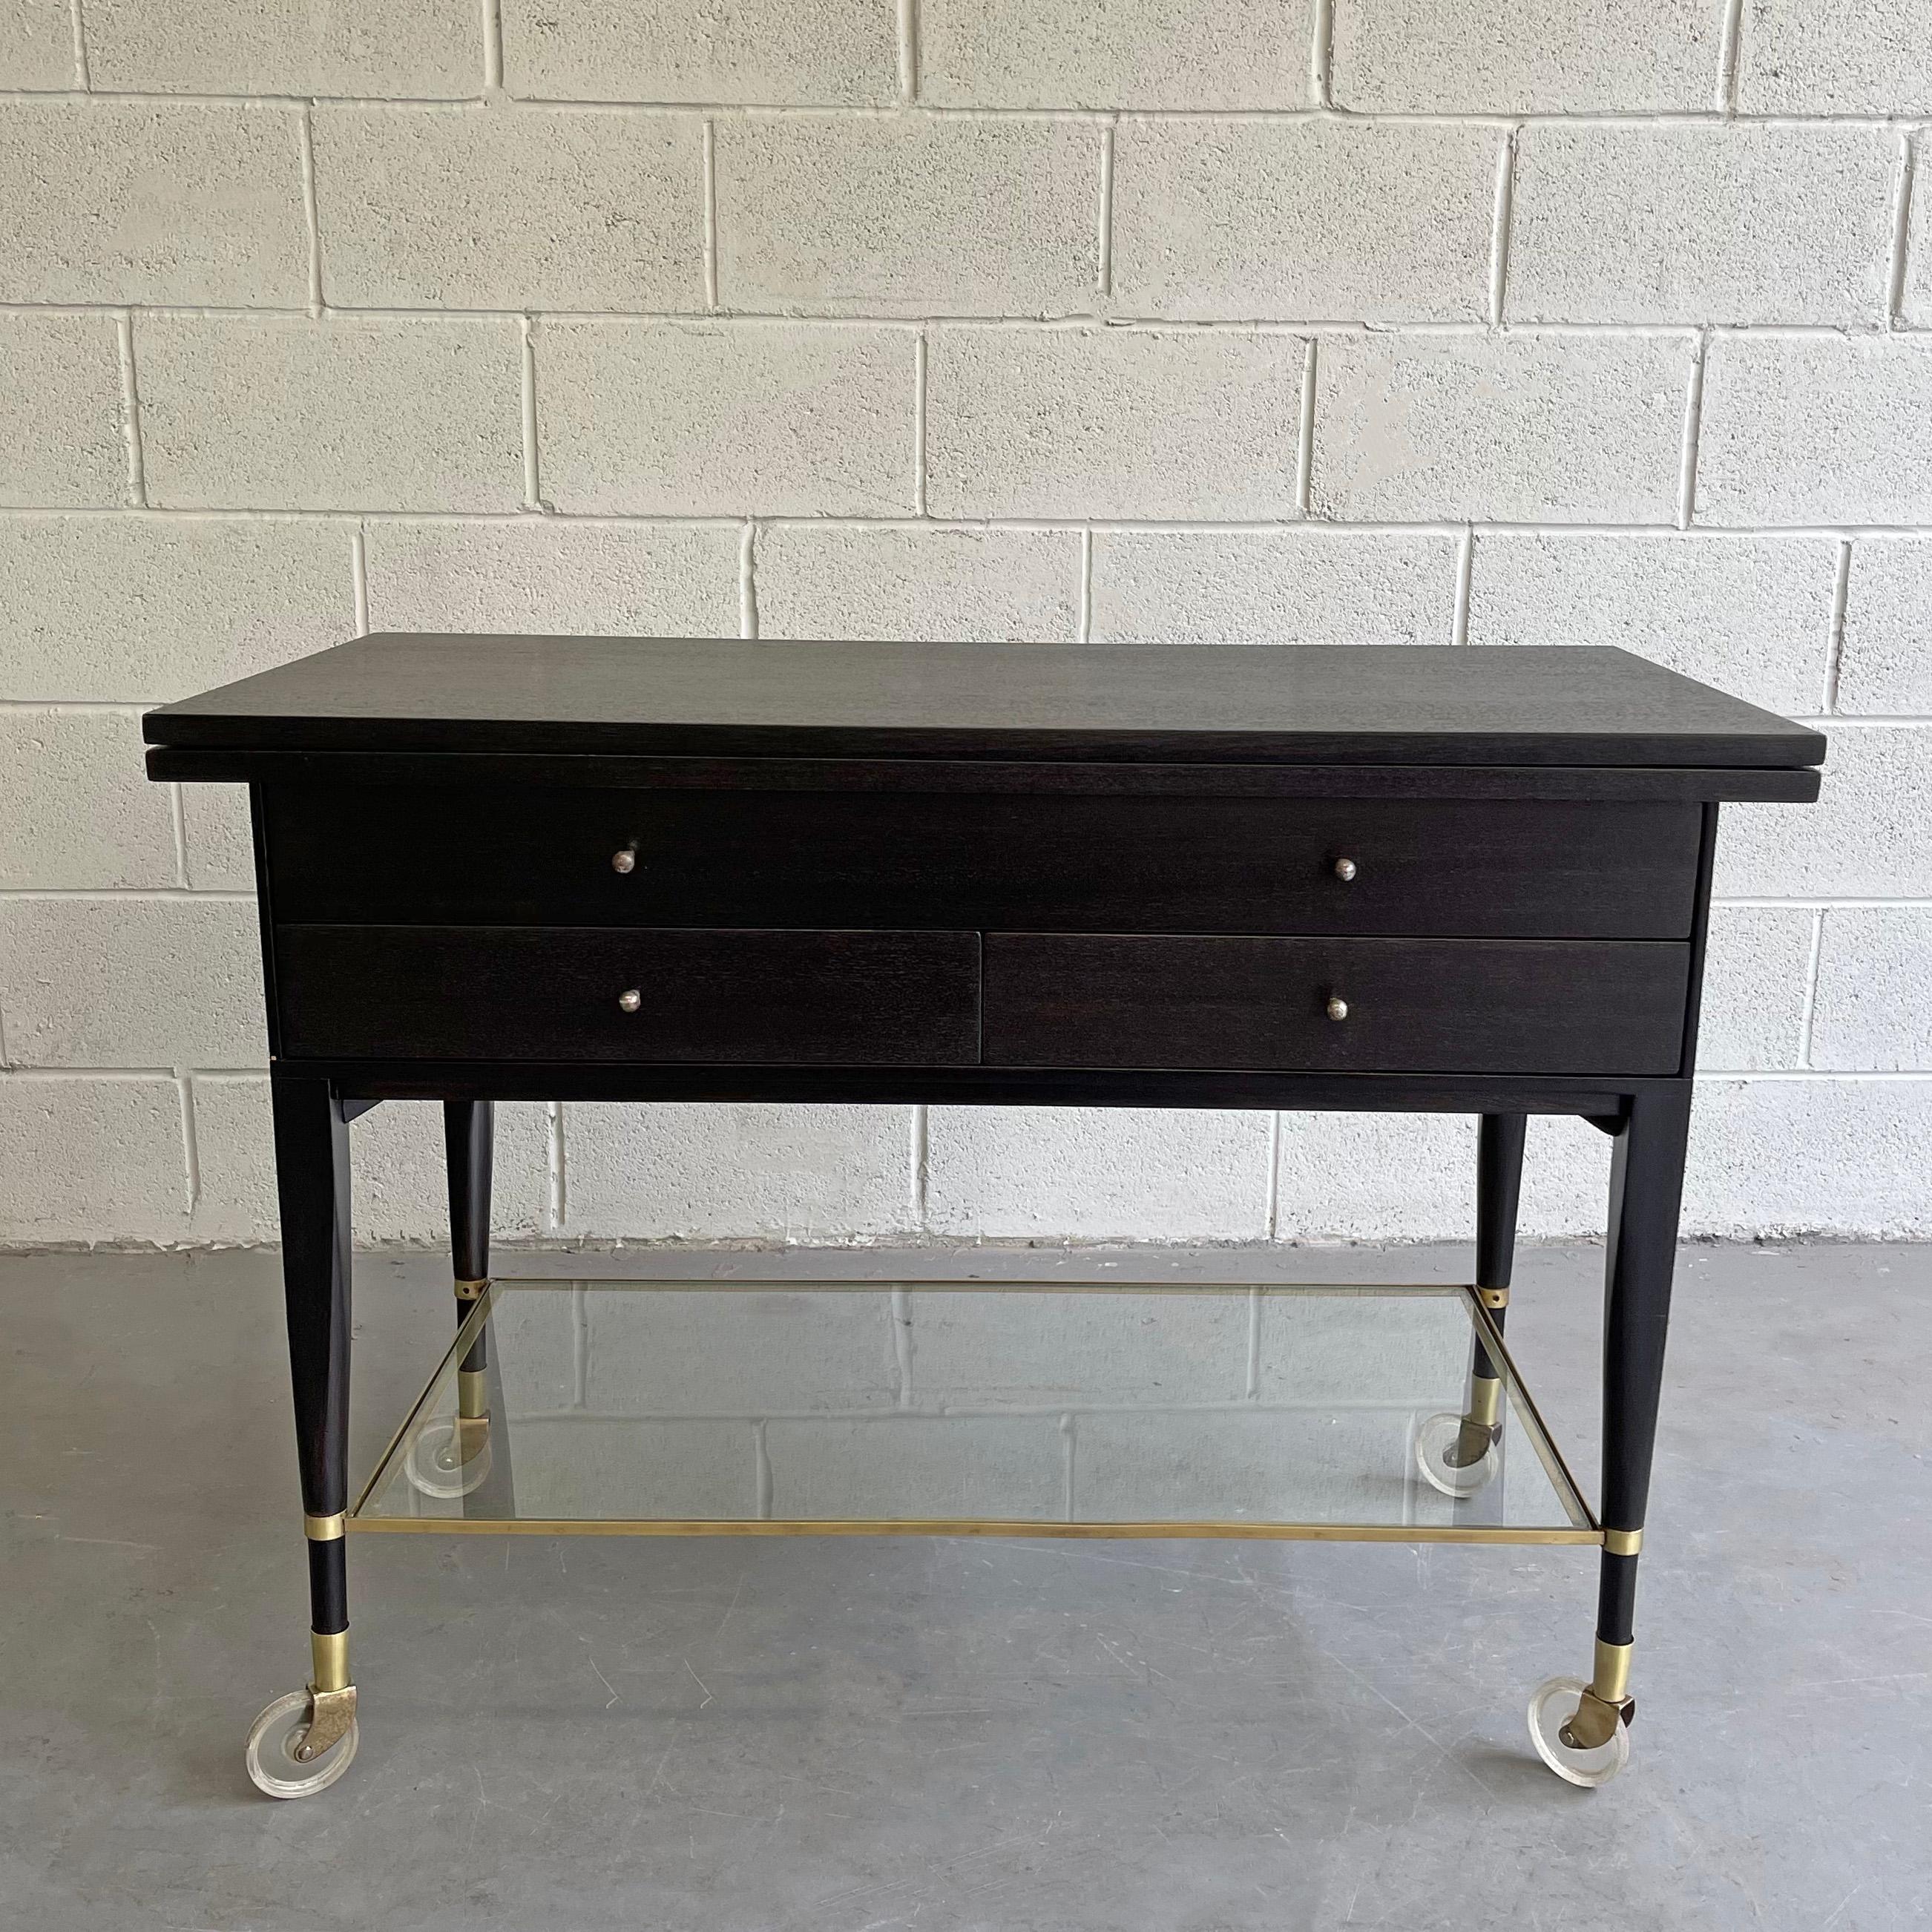 Mid-Century Modern, 4 drawer, mahogany, extension, bar or serving cart by Paul McCobb for Calvin Furniture features an ebonized finish with brass details and hardware and glass lower shelf. The top flips open to extend to 80.5 inches.